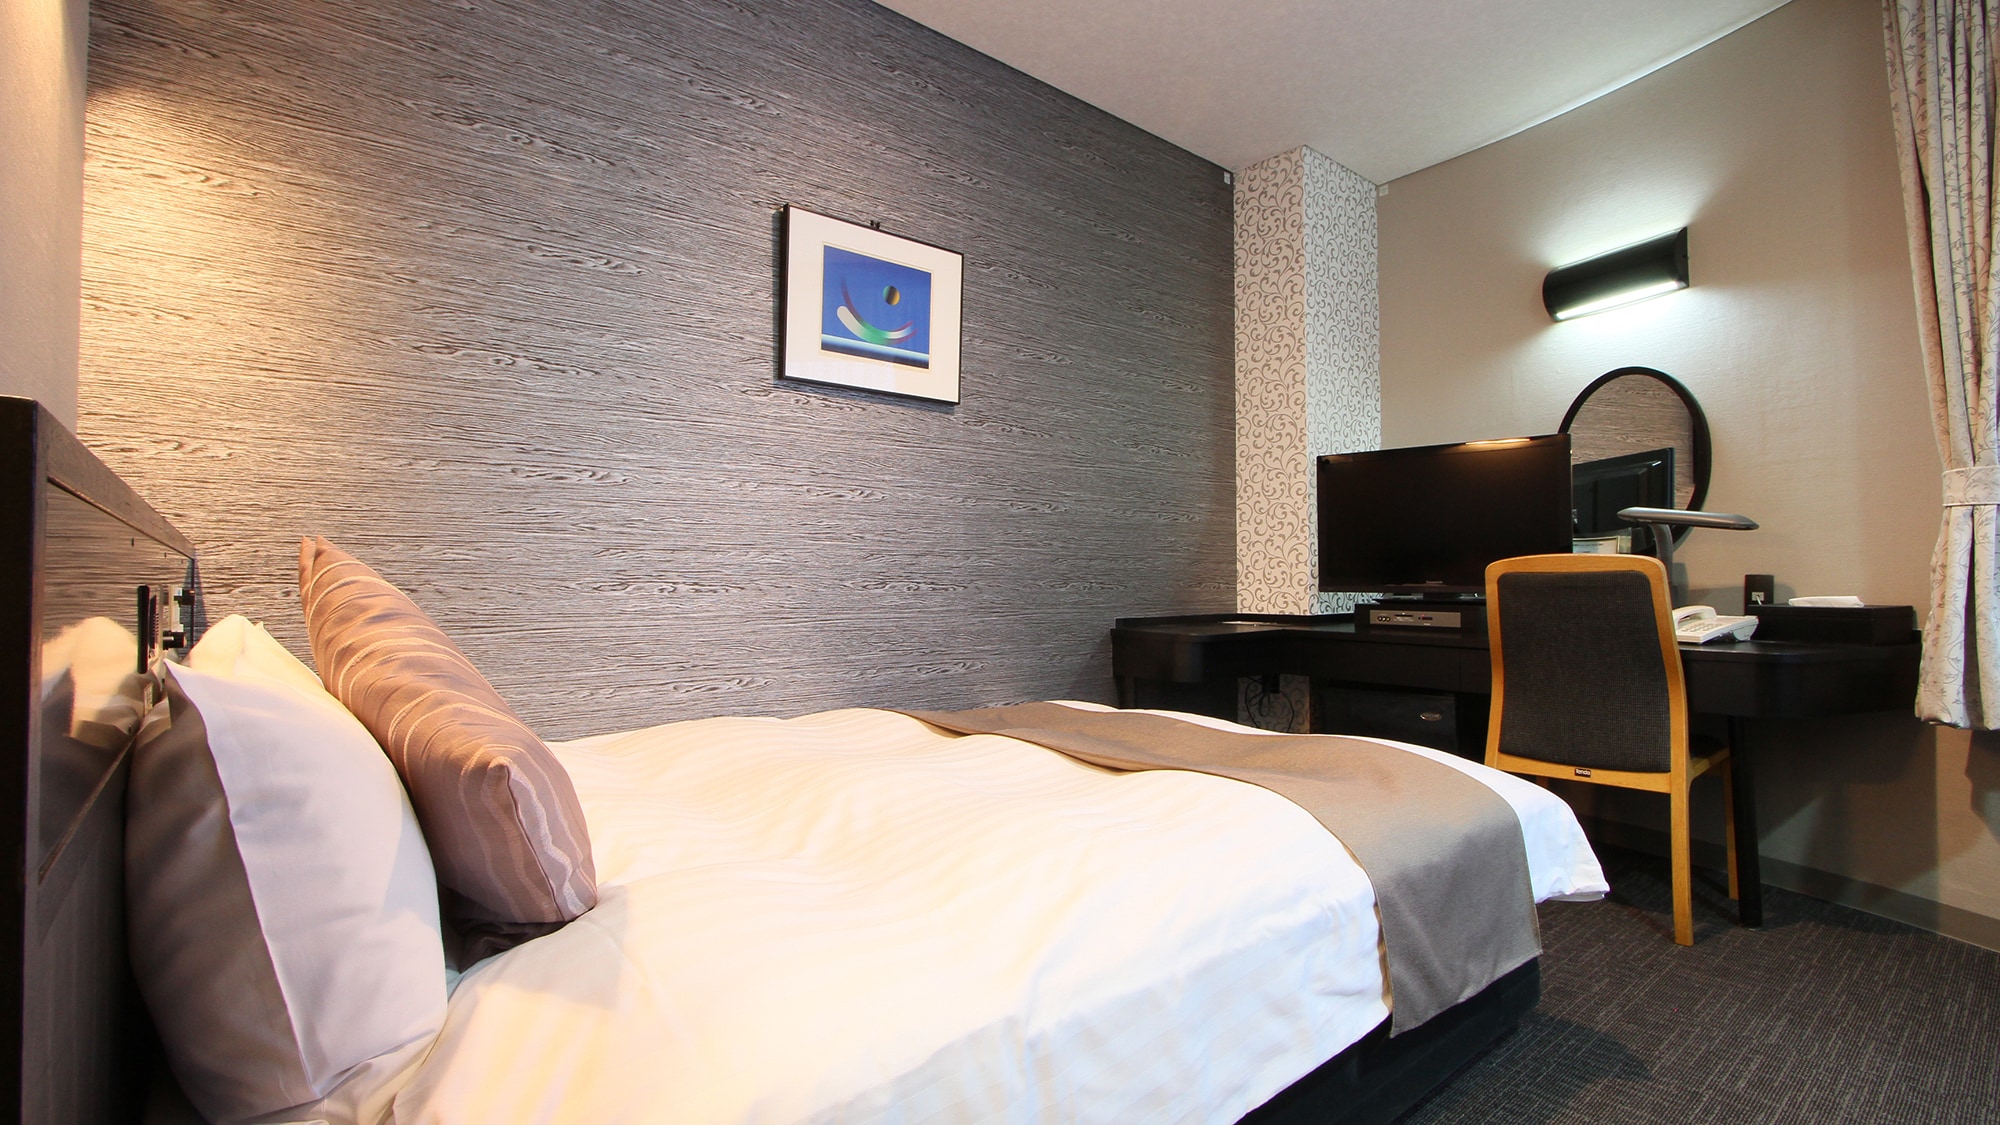 ☆ Double room ☆ ■ Area 19 square meters ■ 140 cm wide bed 1 ♪ Large bed and spacious ^^